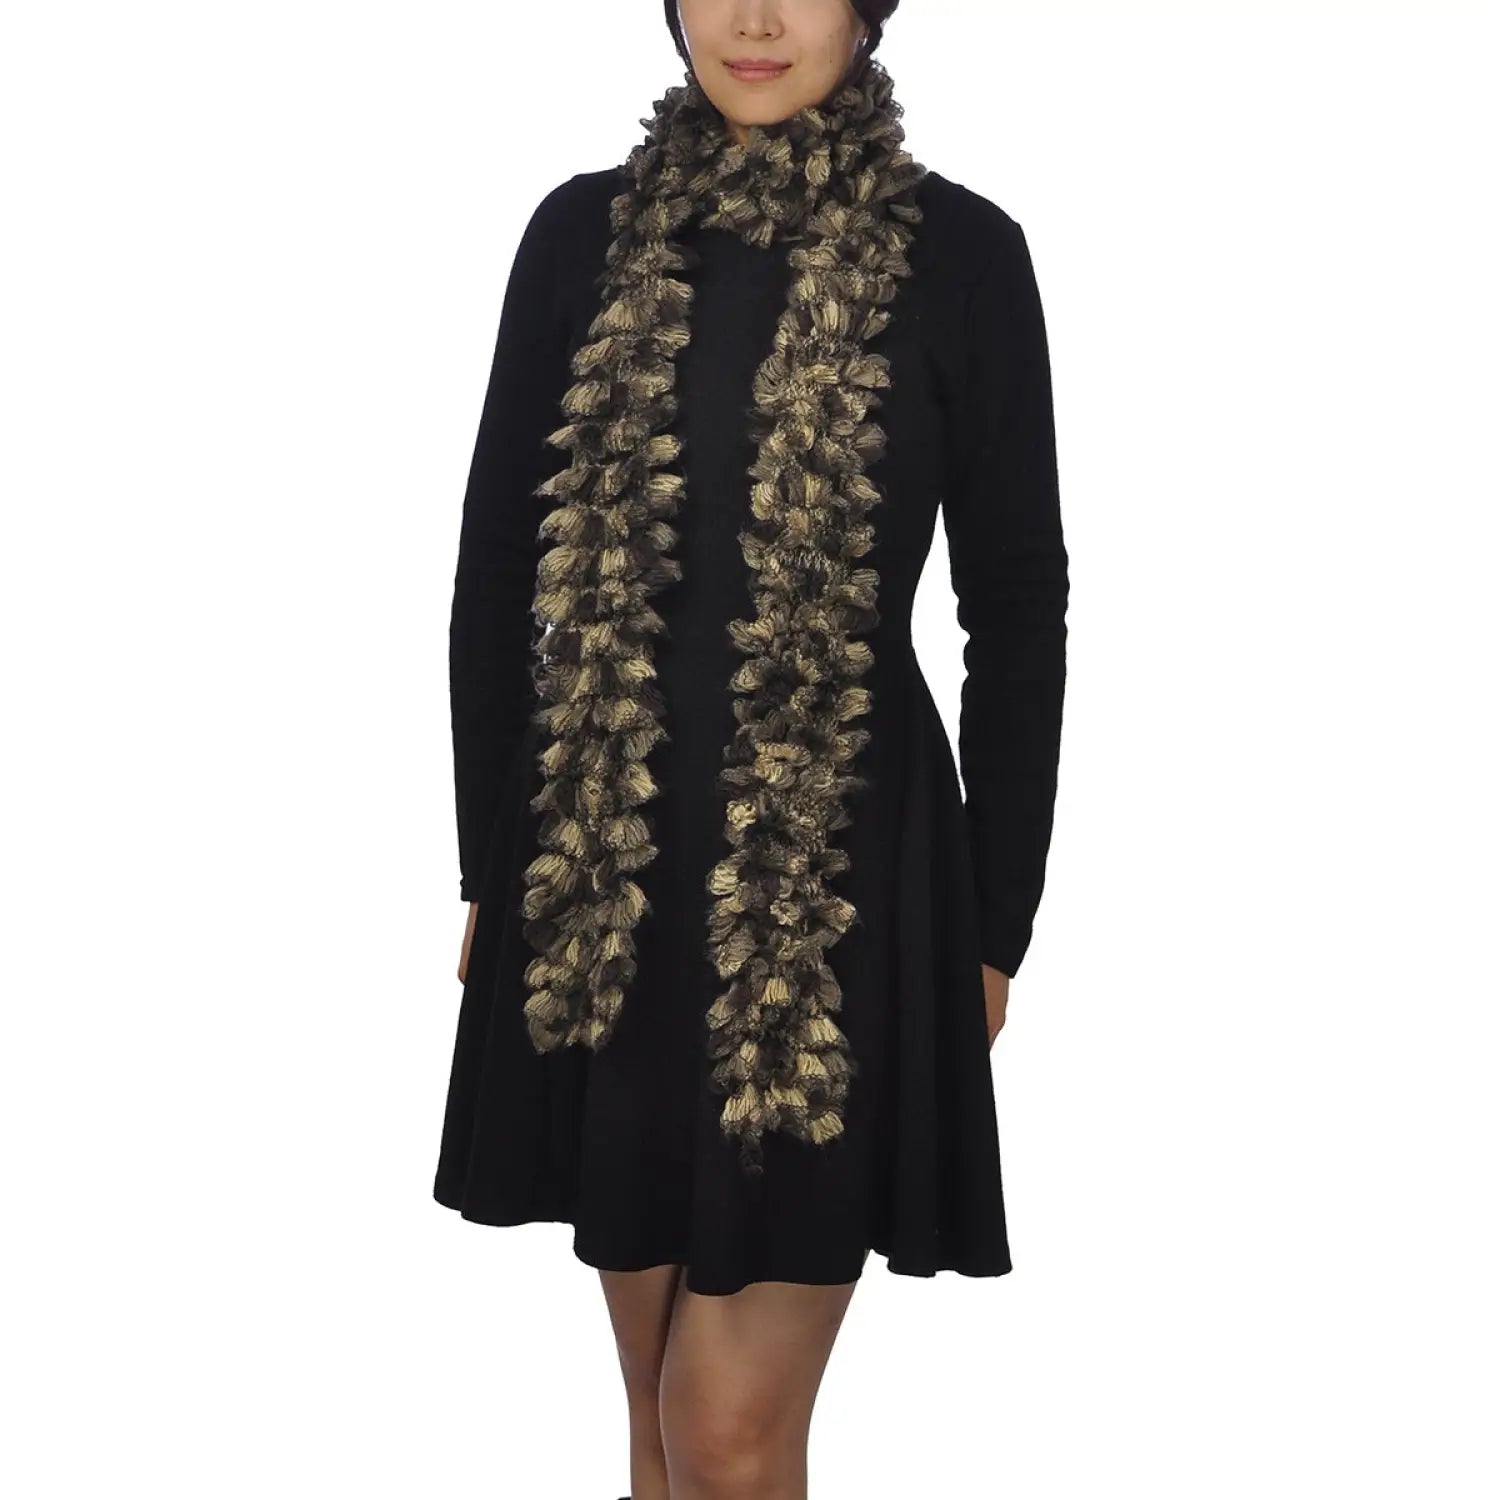 Multicoloured Textured Boa Print Scarf, woman in black dress and gold scarf